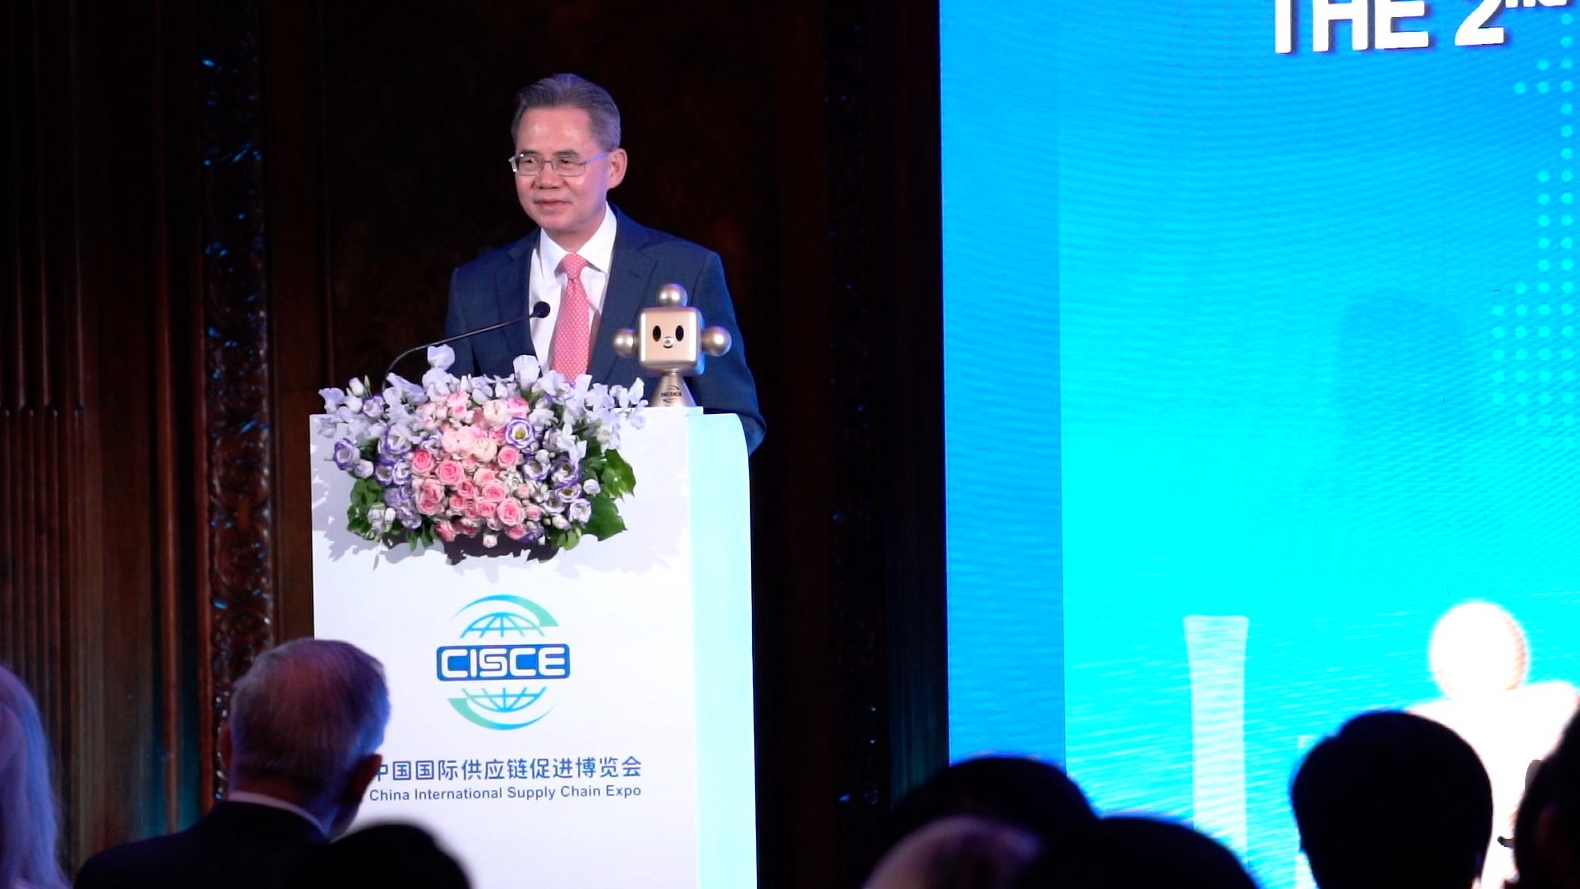 Chinese ambassador to the UK Zheng Zeguang delivering a speech at the promotion event in London, UK. /CGTN